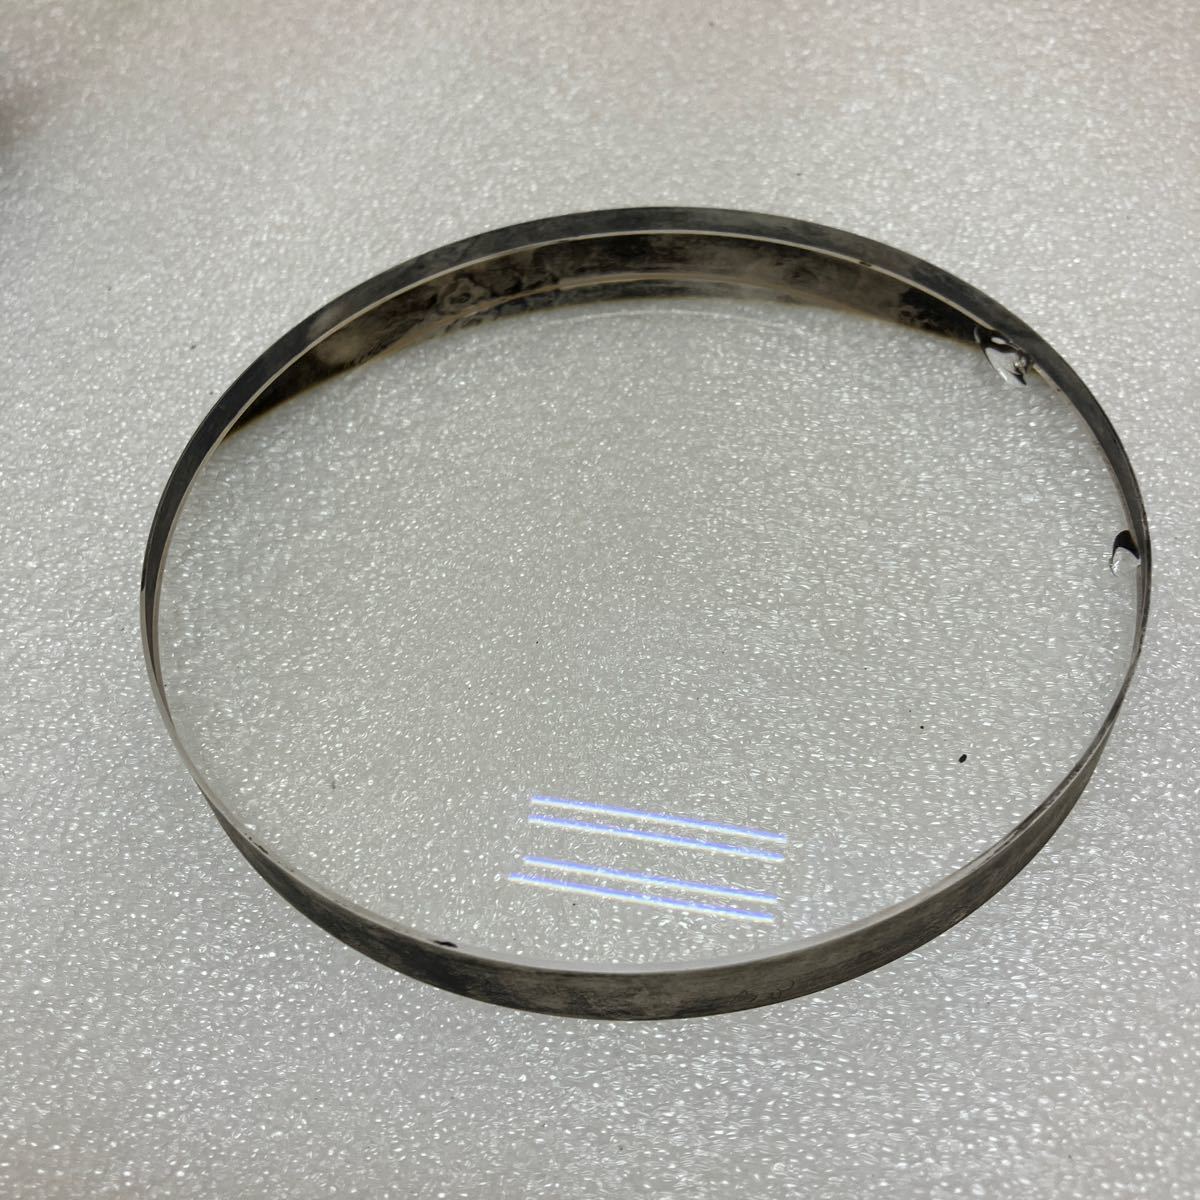 MK5472 lens magnifying glass, diameter 125mm burnt point distance 125mm/50mm,1 point kalas board 2 point physics .., sun ., enlargement for. total 3 point 20240126